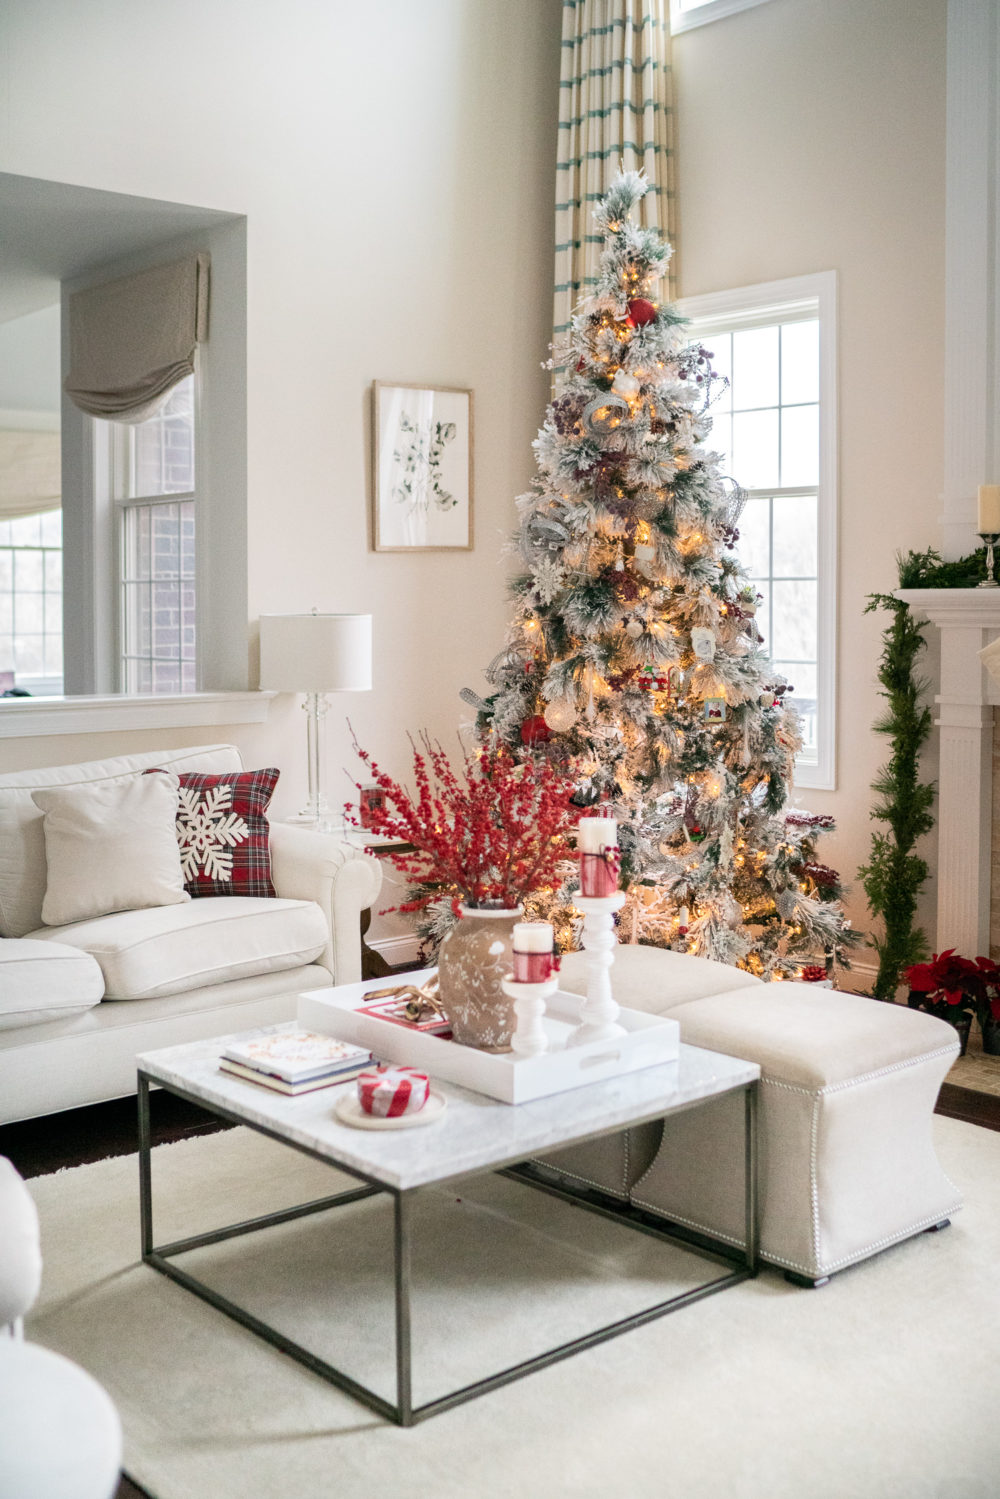 Petite Fashion Blog | Our Home for the Holidays | Flocked Christmas Tree